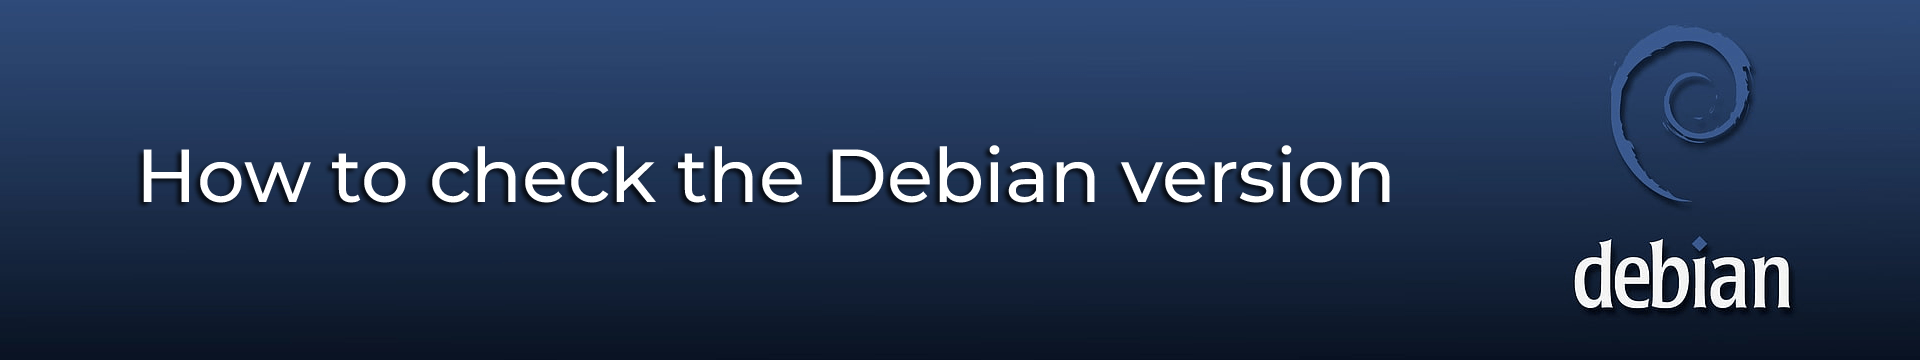 How to check the Debian version